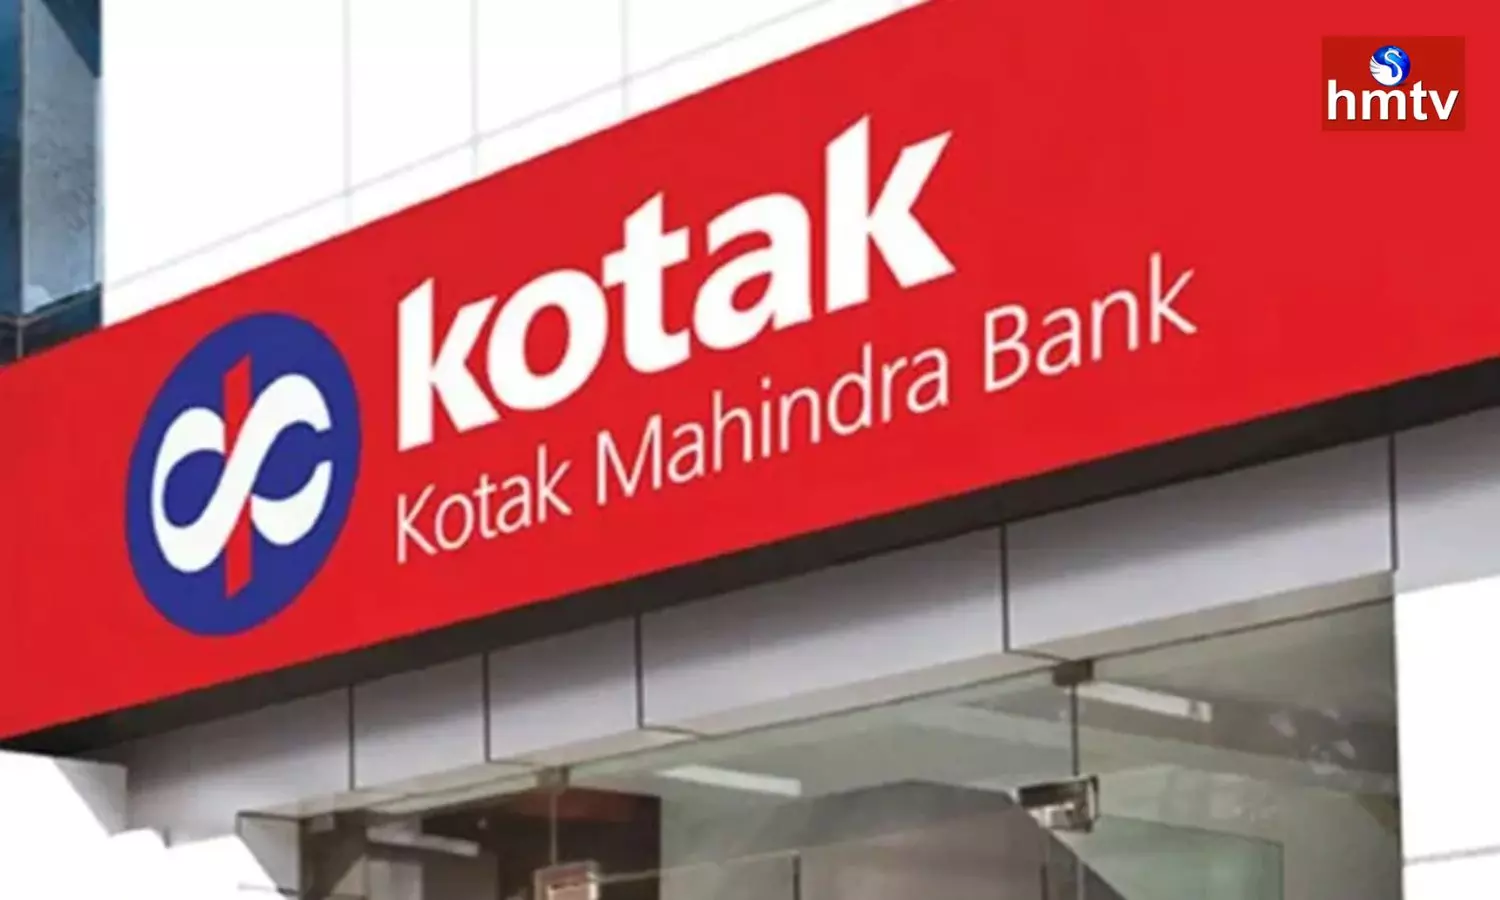 Kotak Mahindra Bank has increased interest rates on fixed Deposits for the third time